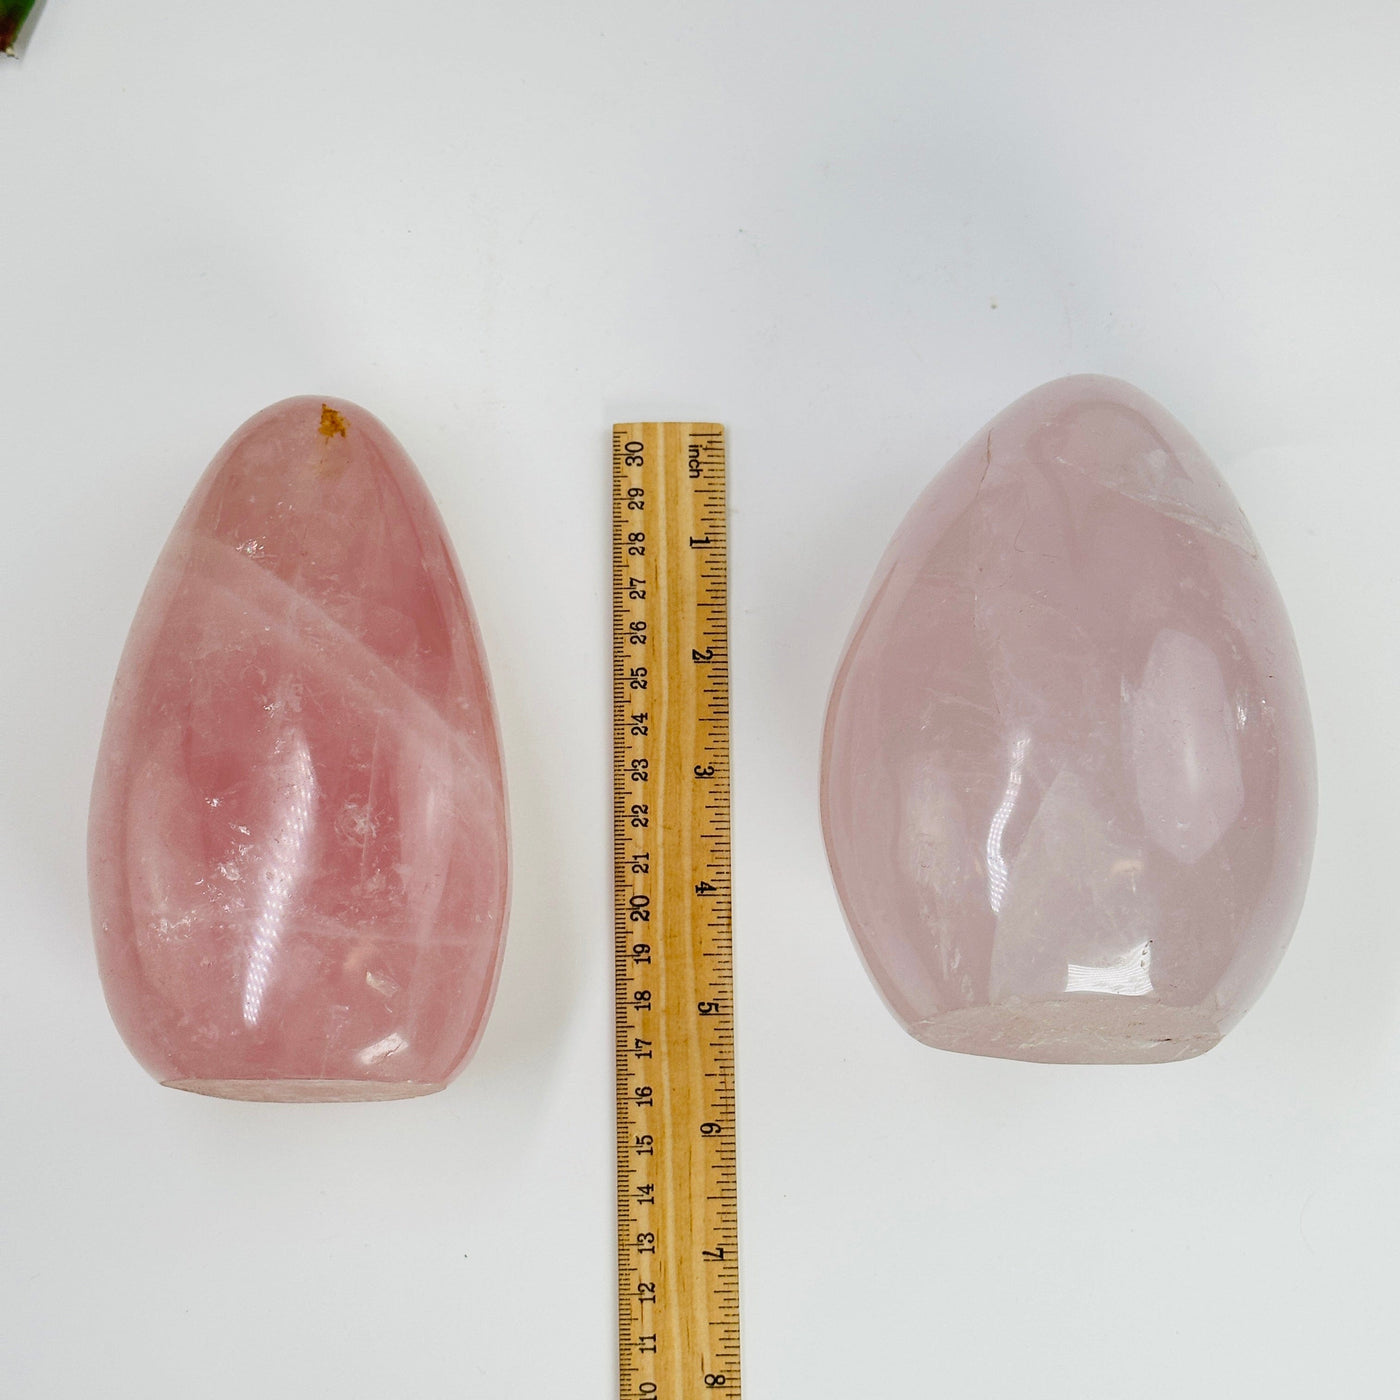 rose quartz cut base next to a ruler for size reference